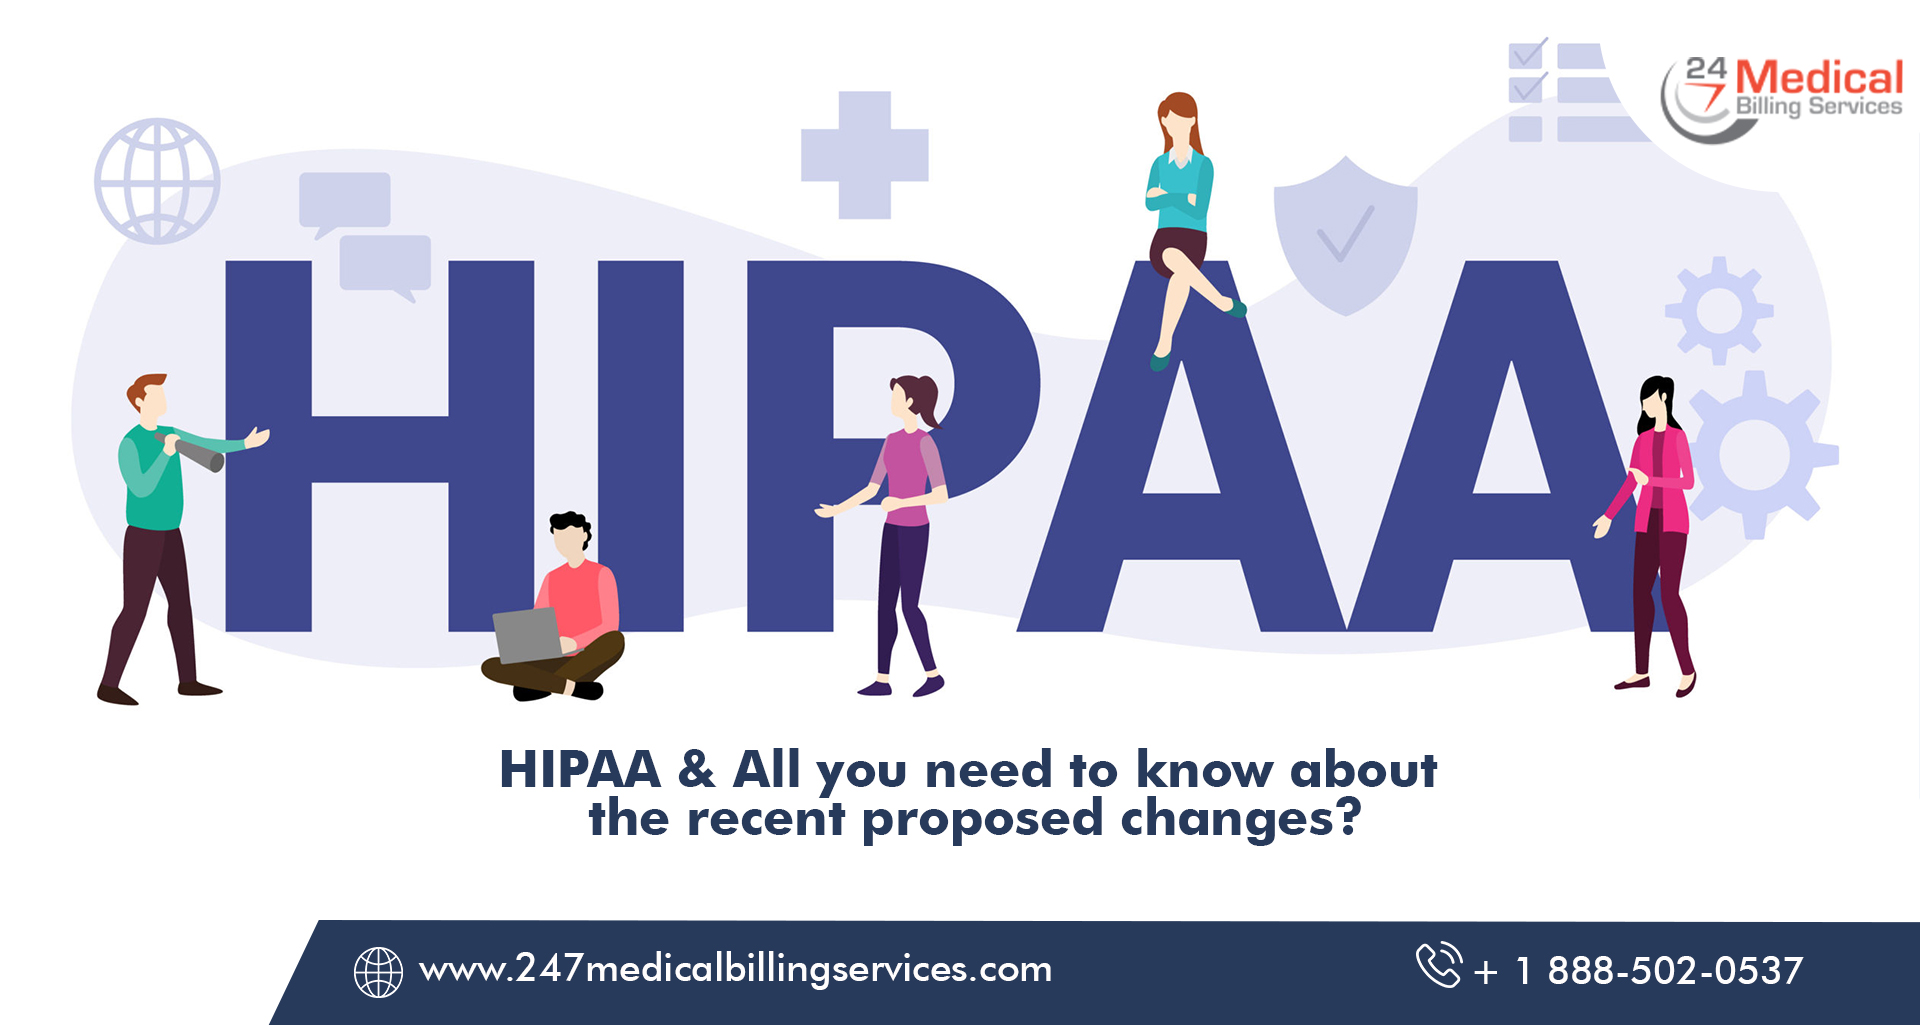  HIPAA & All you need to Know about the Recent Proposed Changes